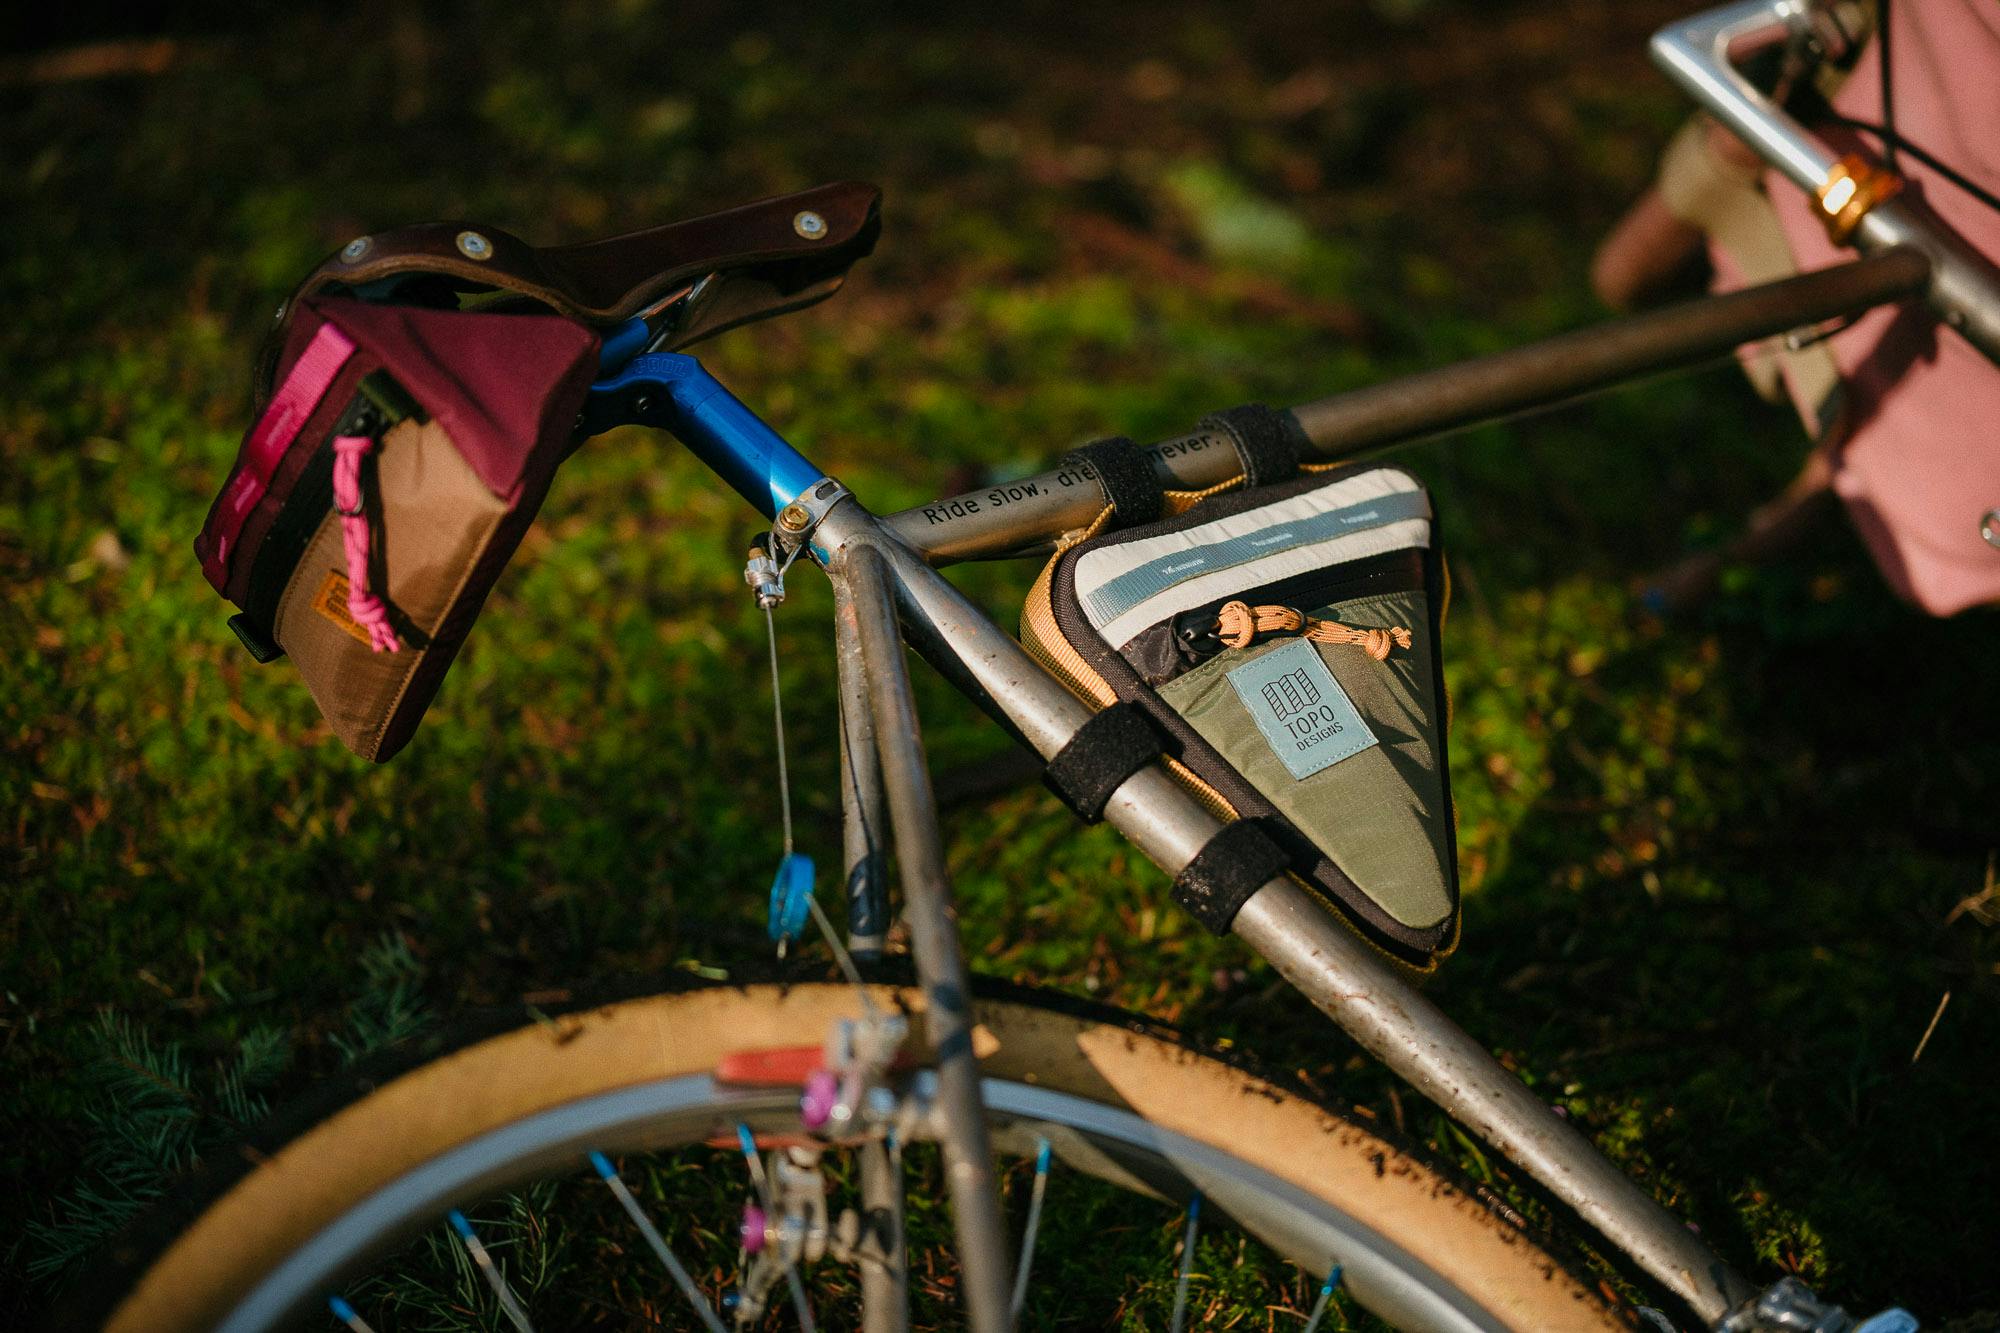 The Topo Designs frame pack looks great on vintage bikes